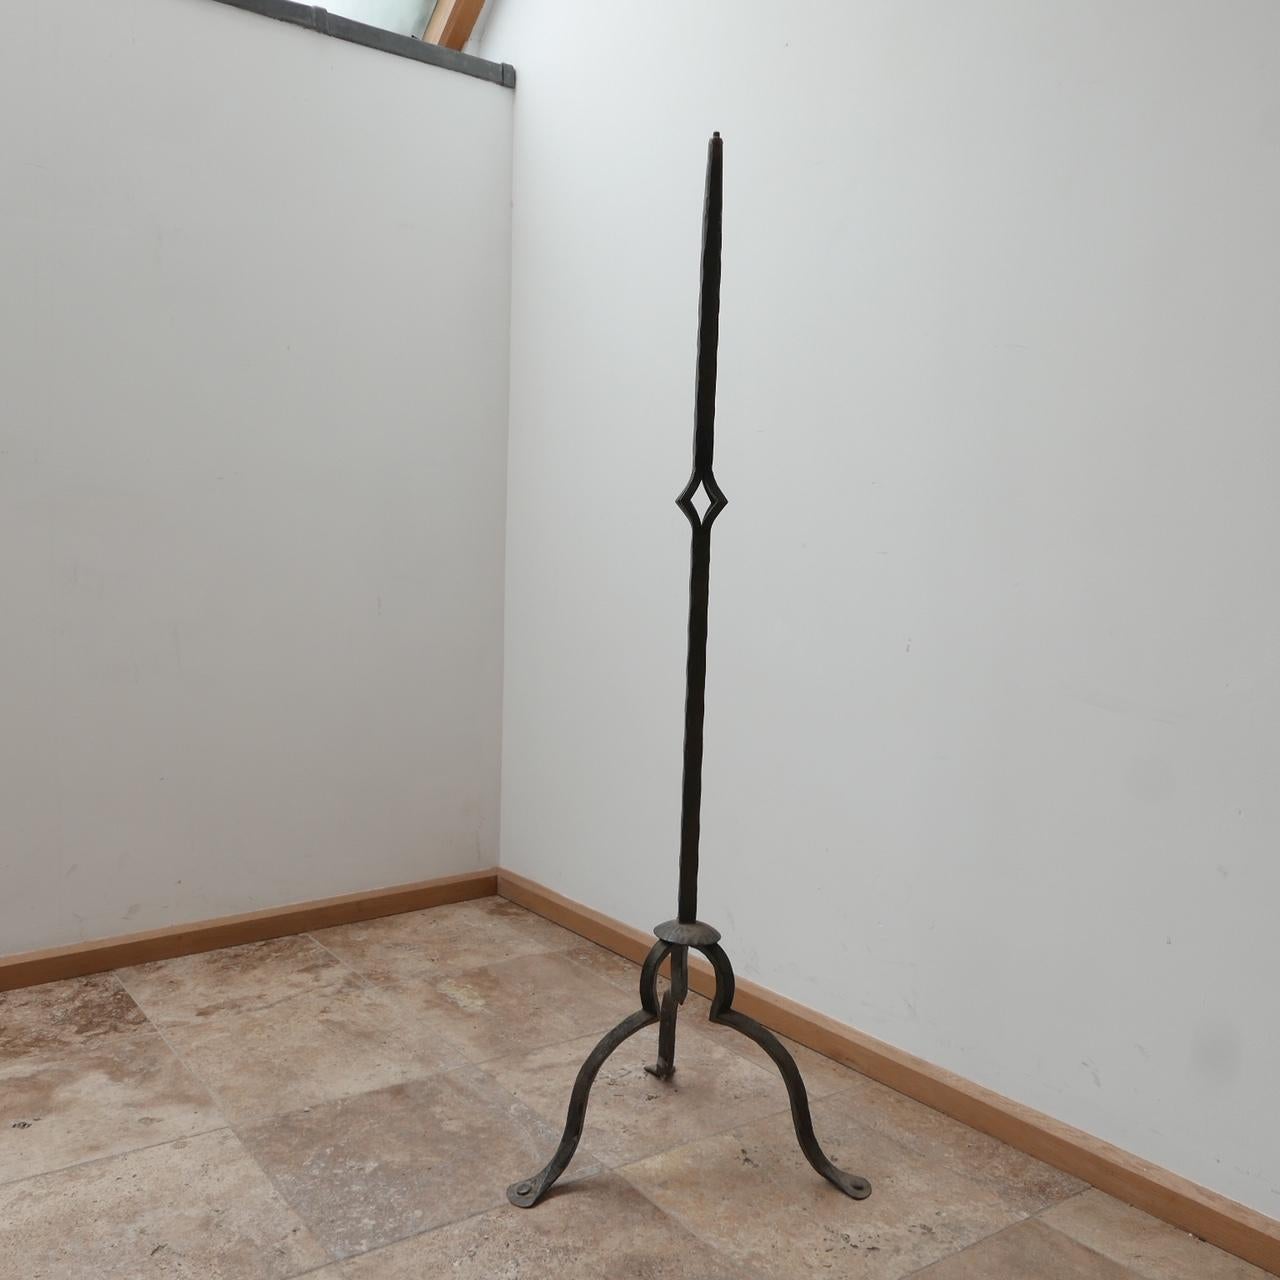 An exceptional iron floor lamp. 

Simple elegant design with three well formed legs, but the pièce de résistance is the central geometric design. 

France, c1930s. 

Immense quality. 

Since re-wired and PAT tested. 

Location: